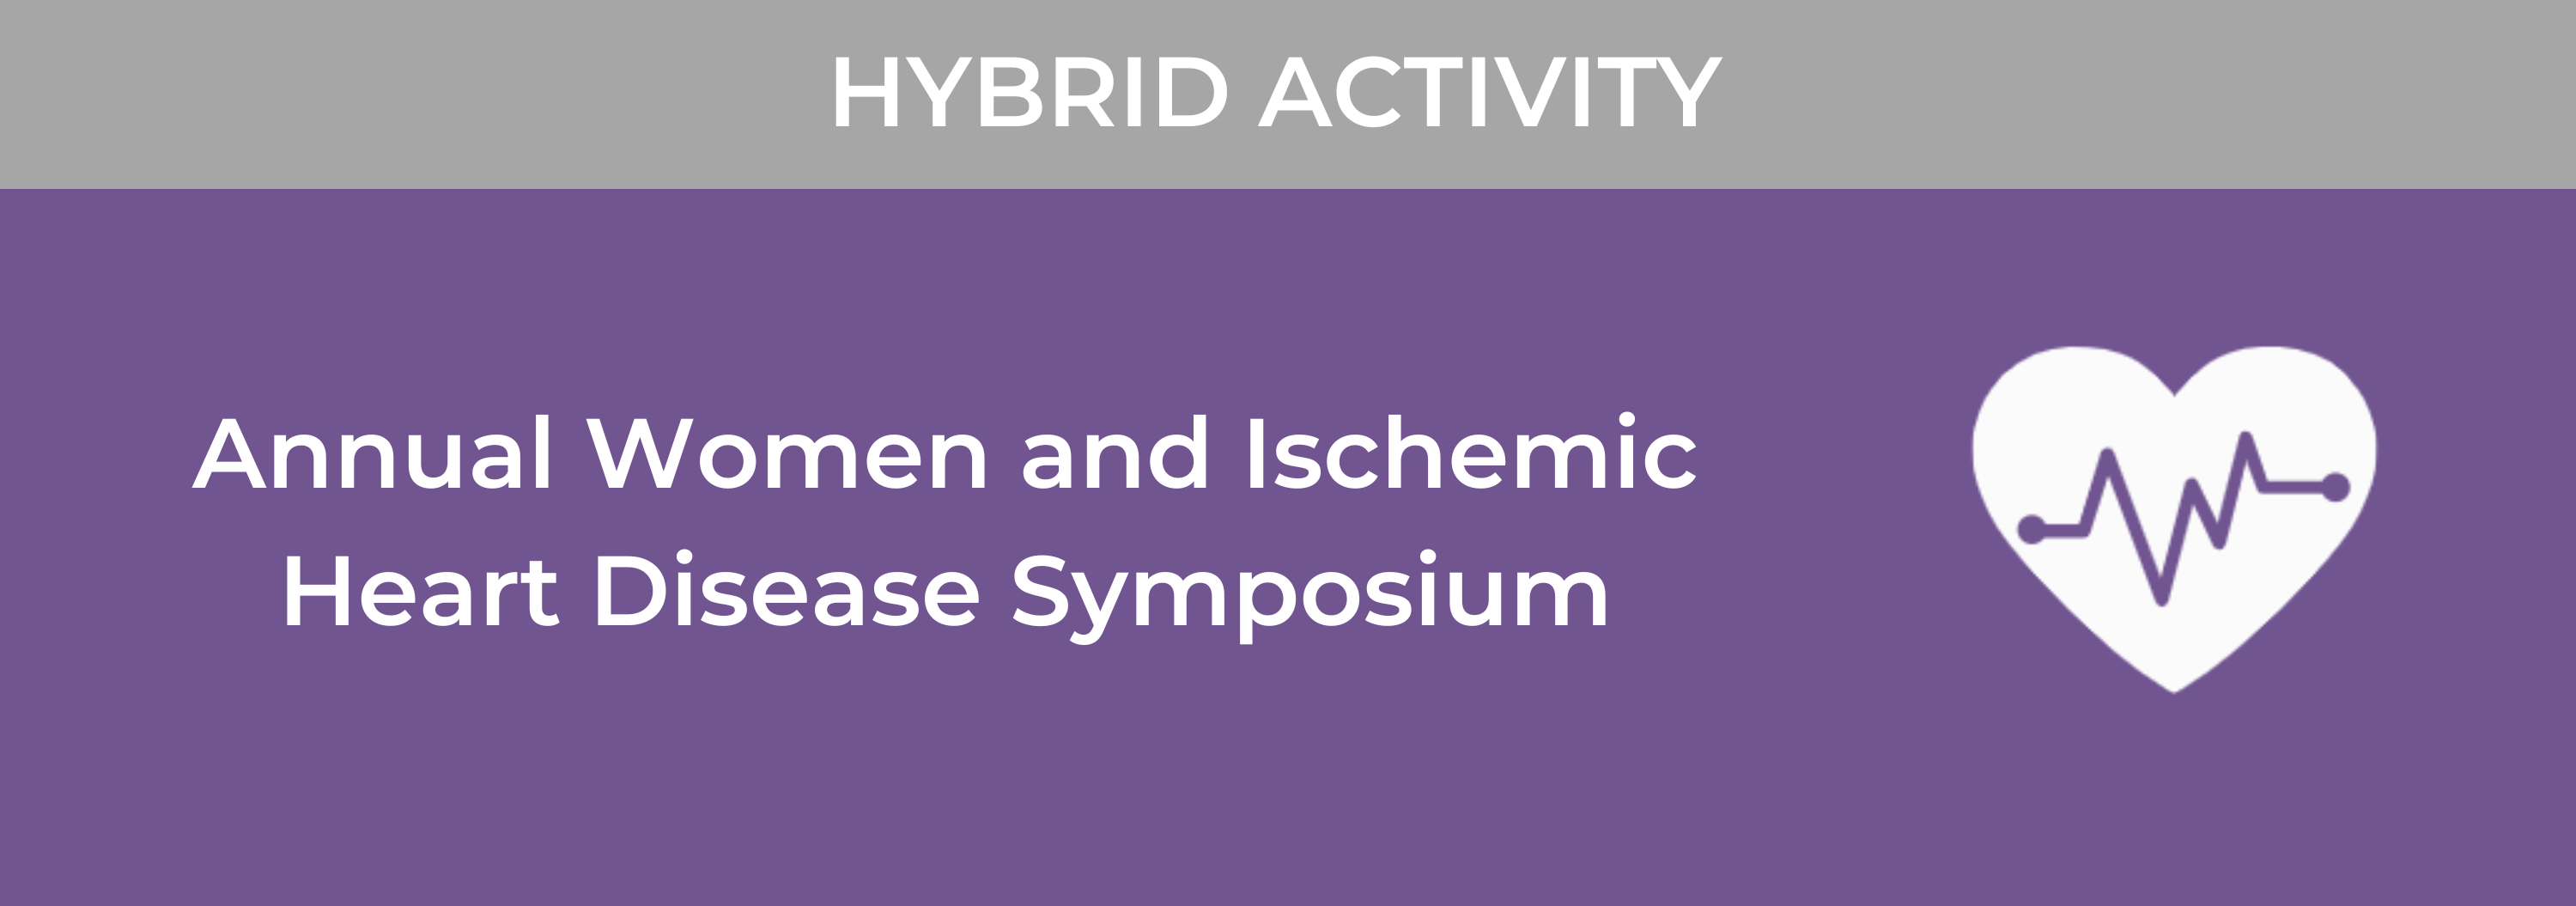 17th Annual Women and Ischemic Heart Disease Symposium Banner